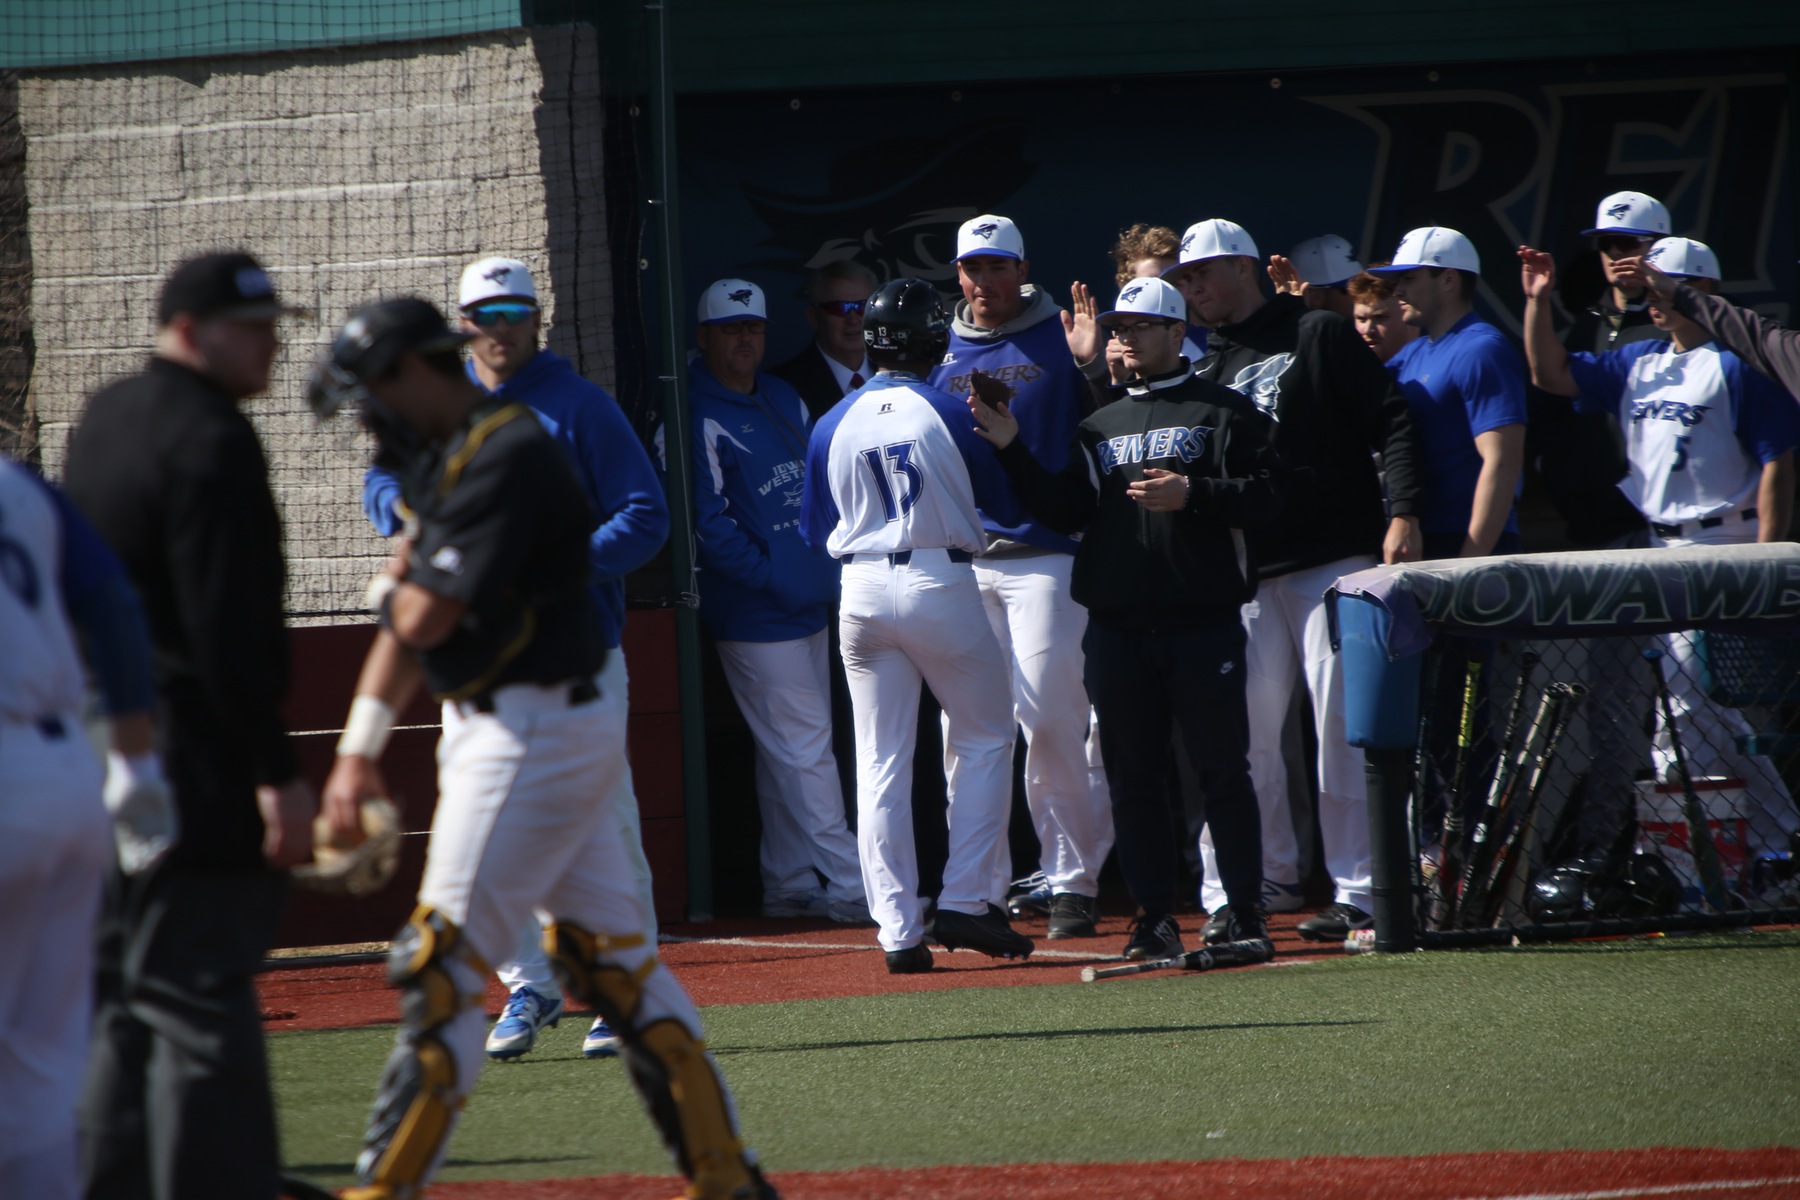 6 Days Separated the Series, Couldn't Stop the Reivers from Sweeping Marshalltown